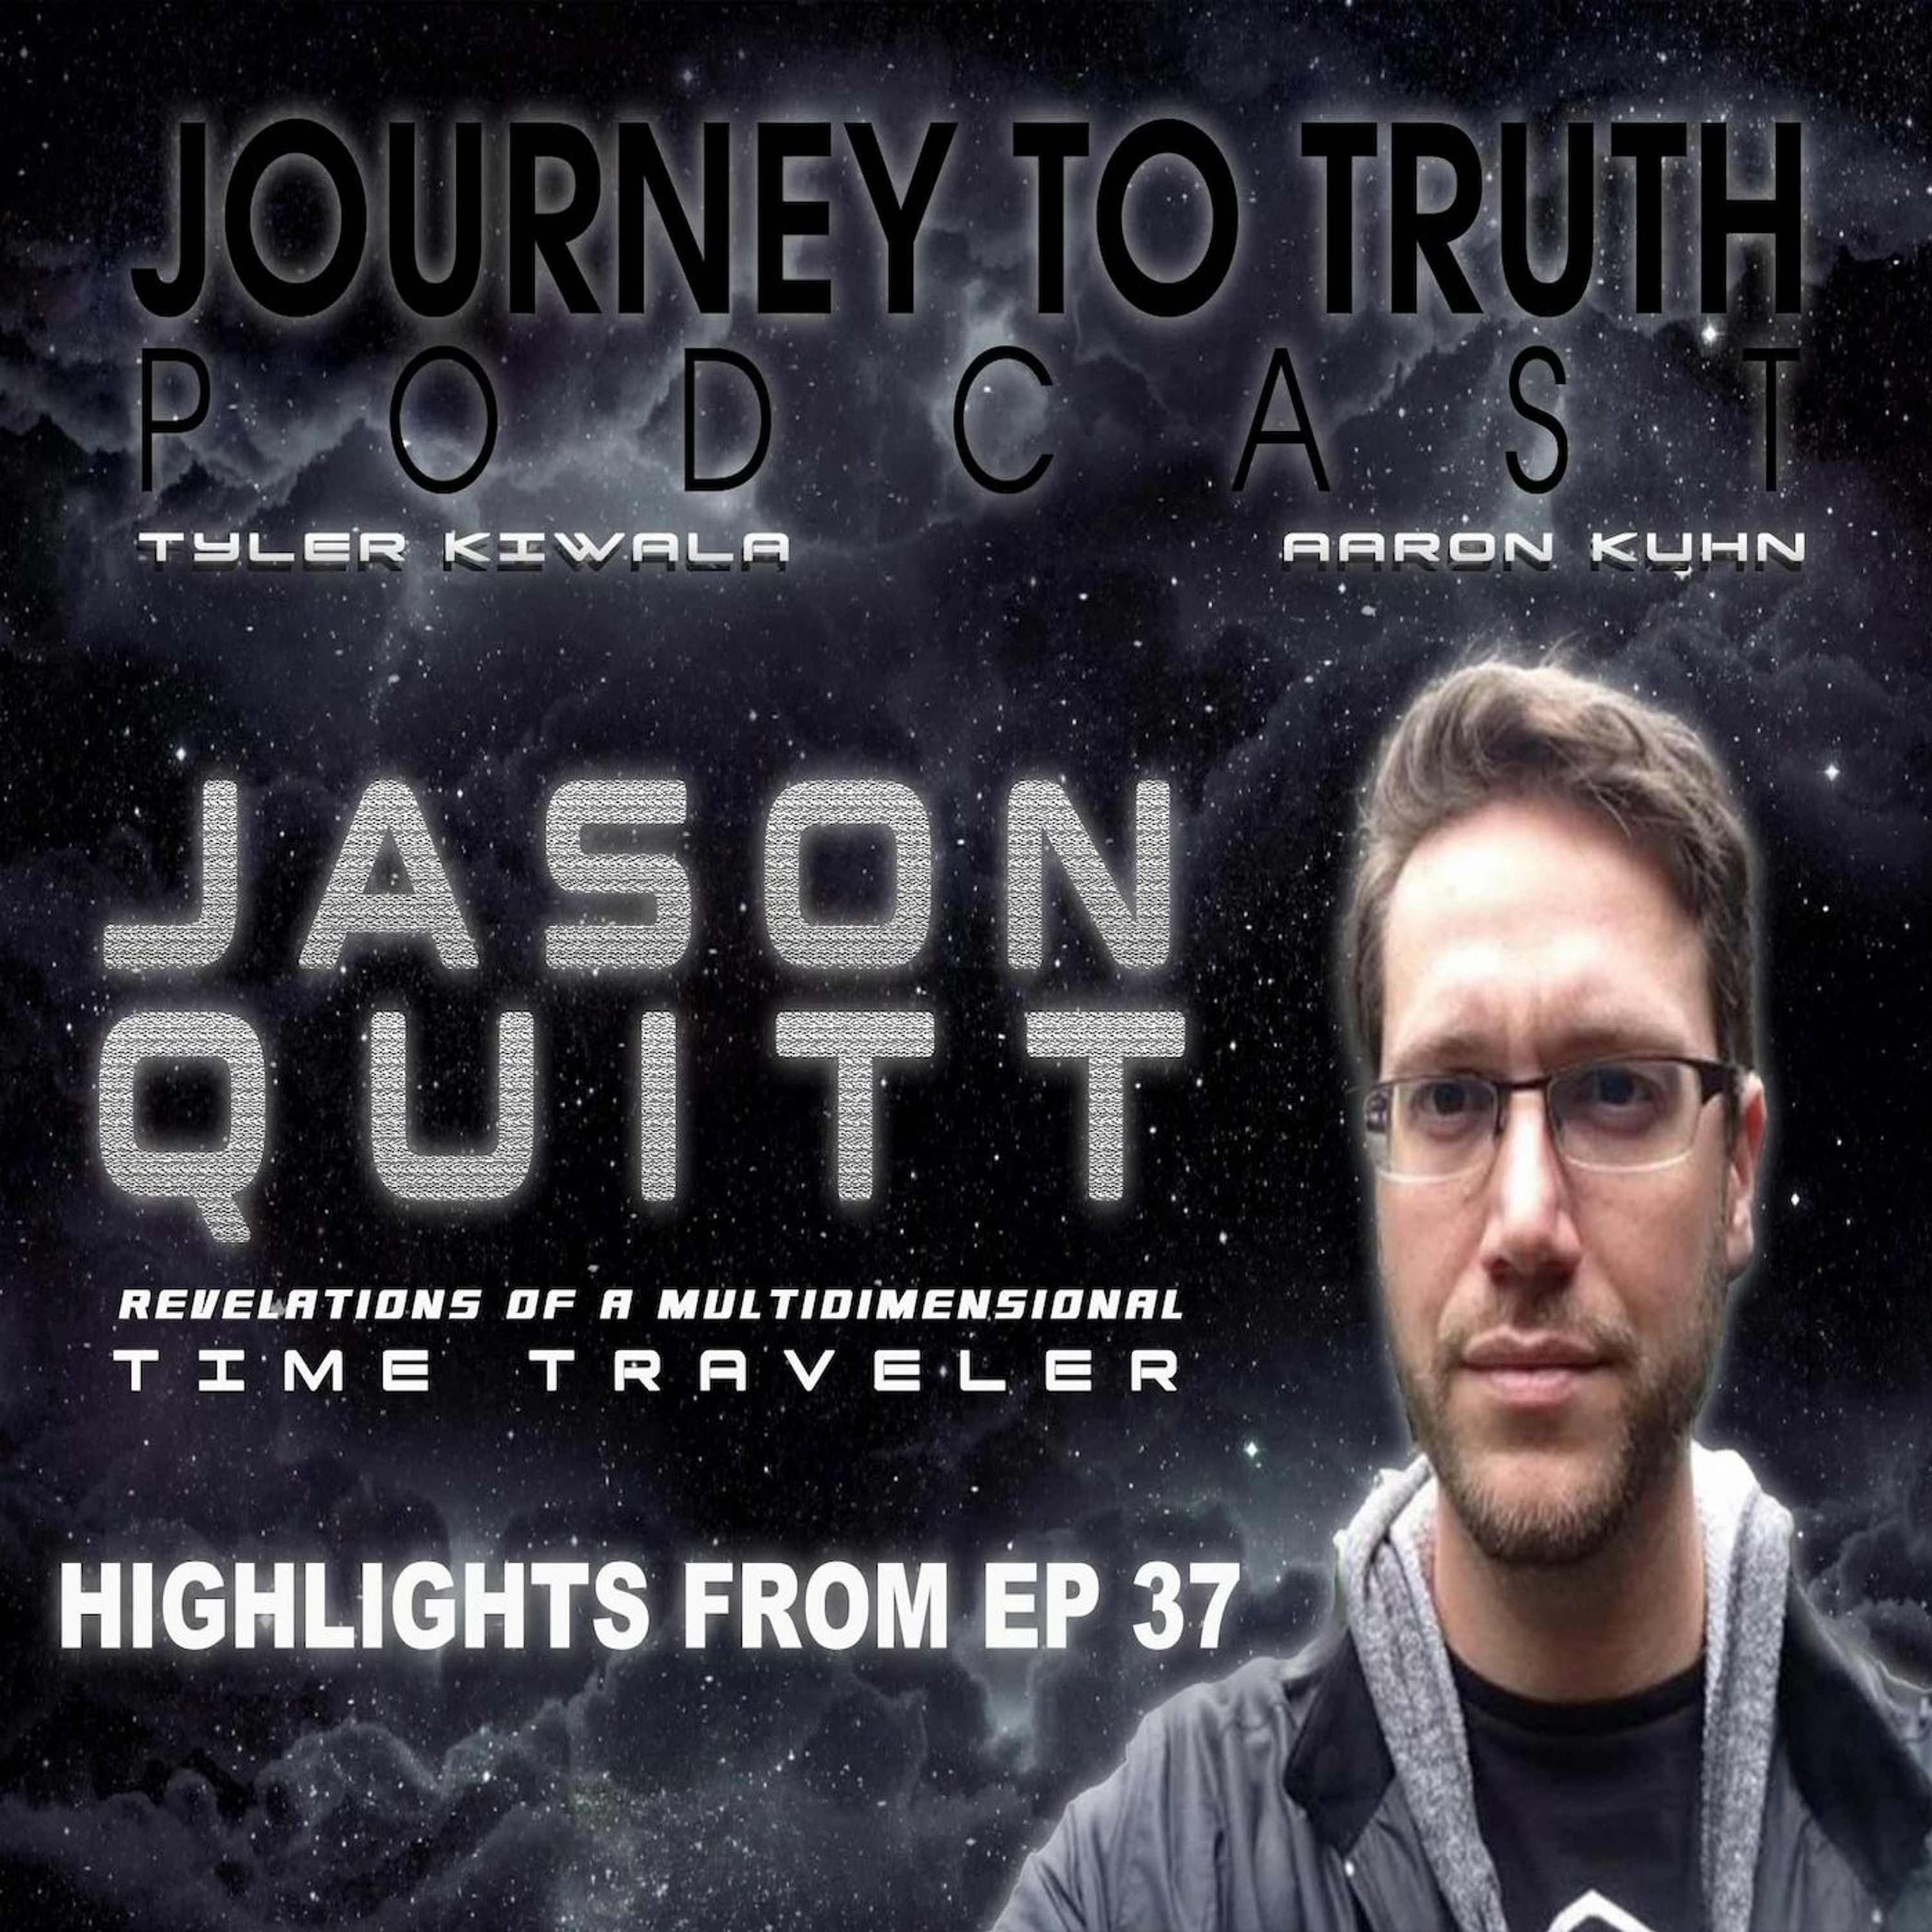 Highlights From Ep. 37 With Jason Quitt (10/25/19)